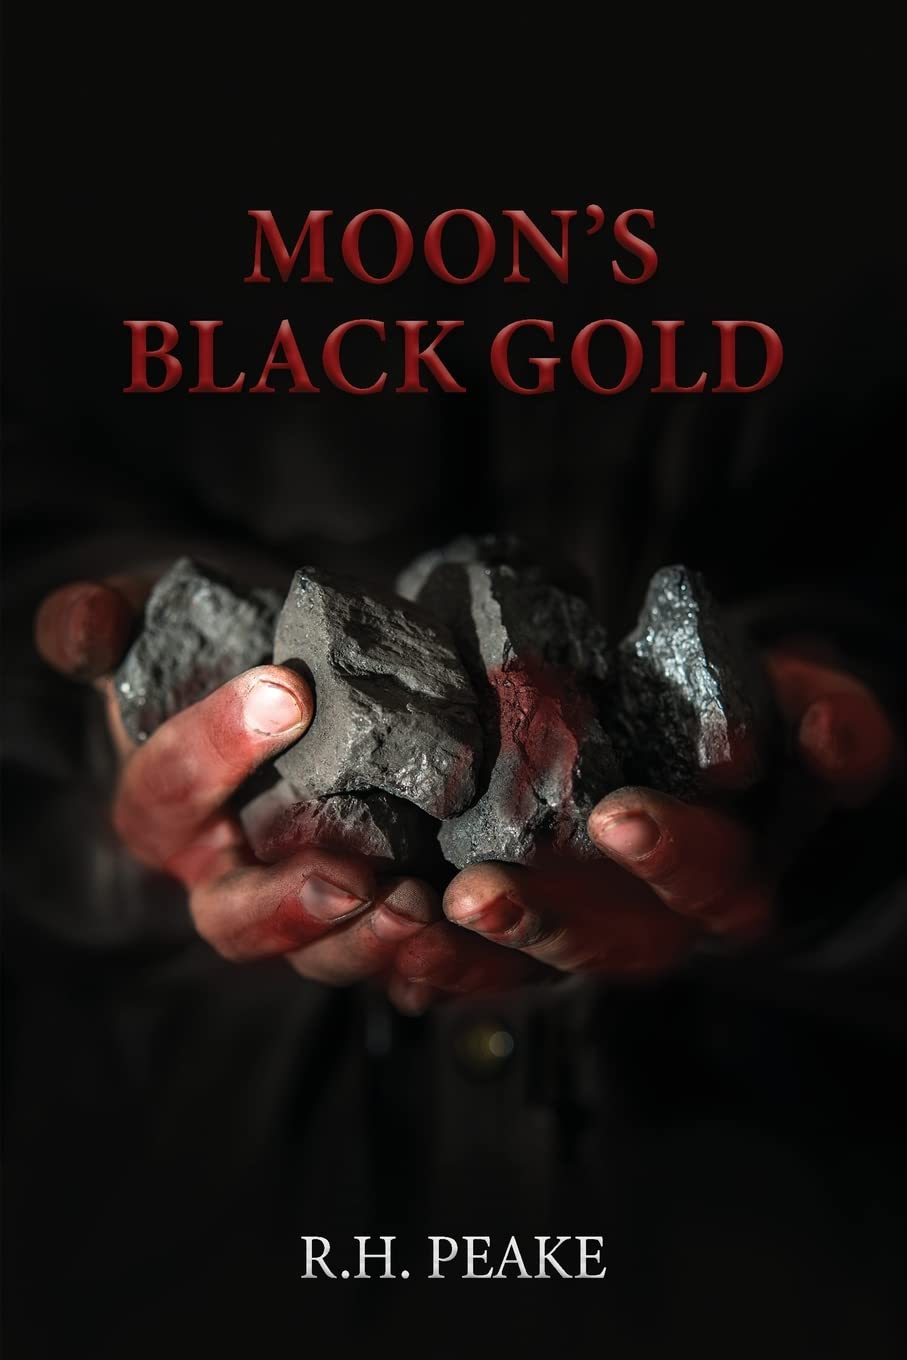 R H Peake’s Moon's Black Gold Promoted by Author’s Tranquility Press